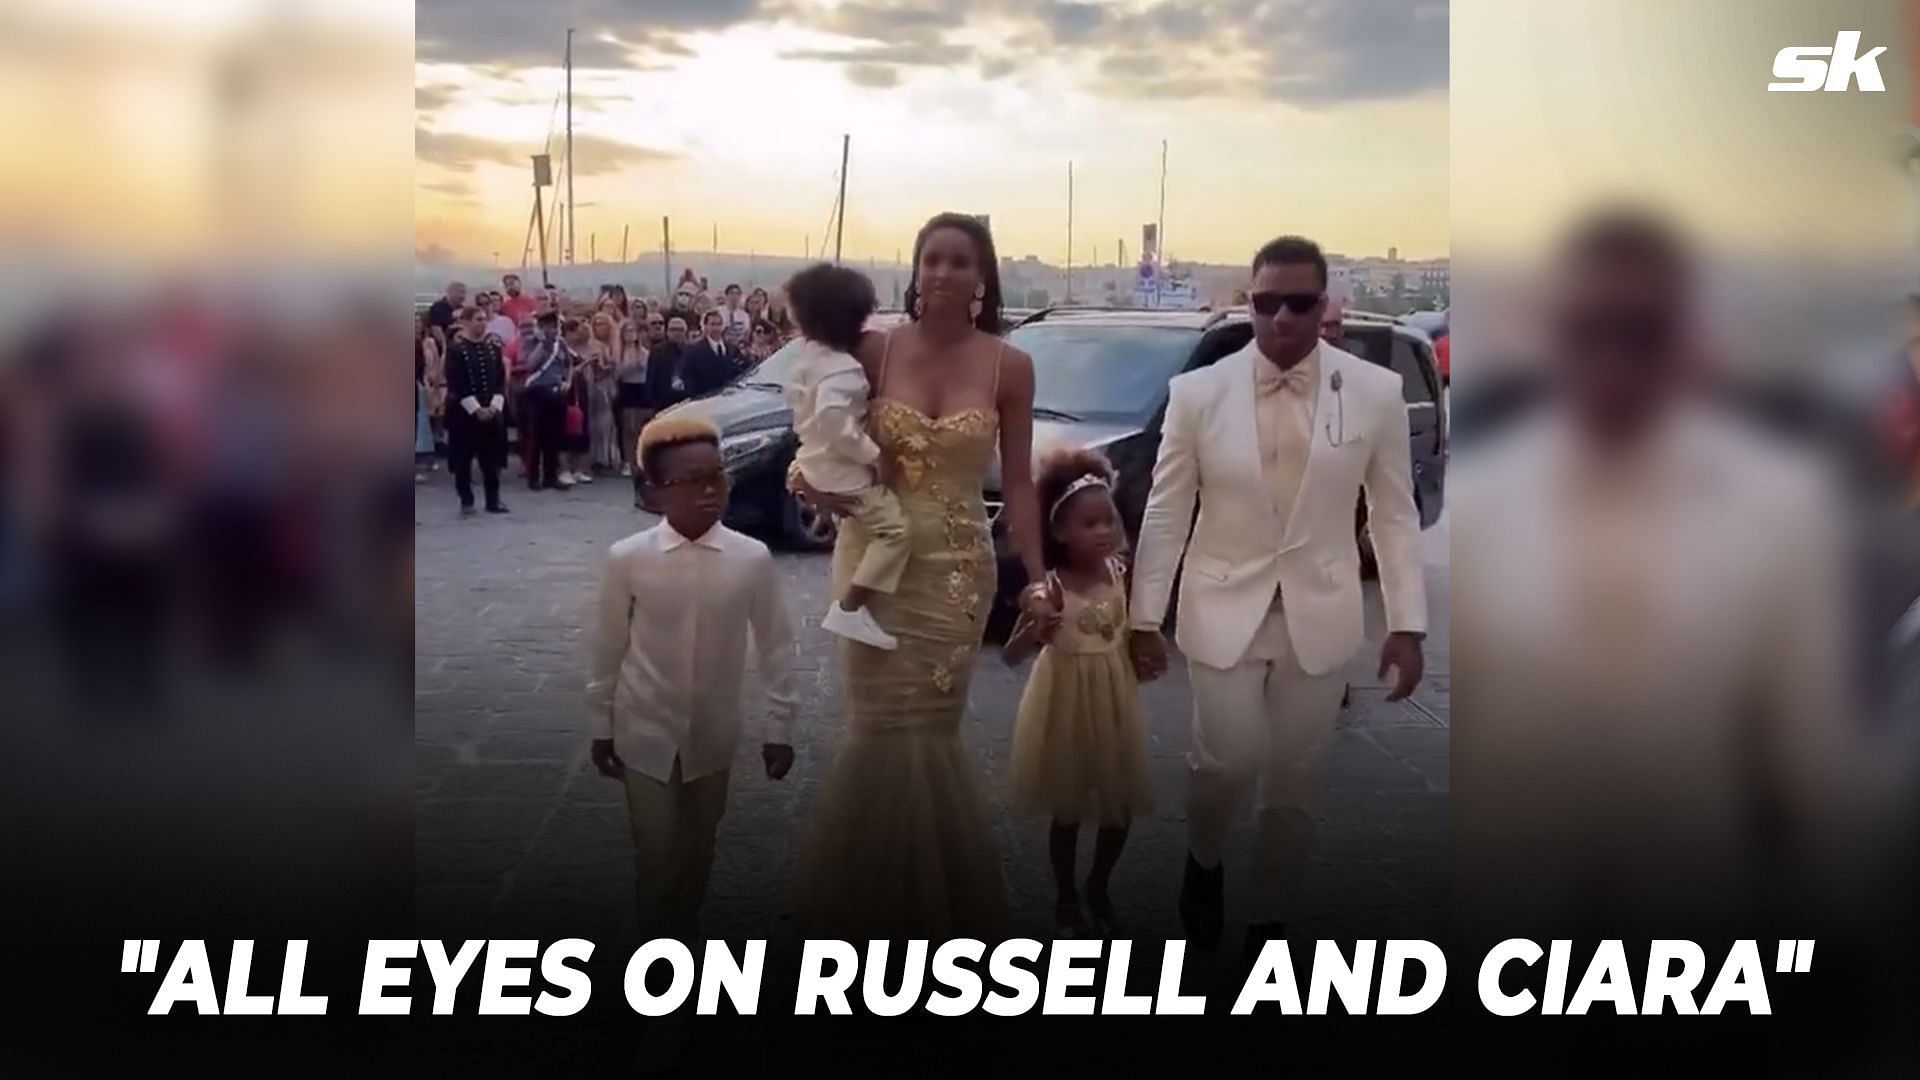 Russell Wilson and Ciara own the red carpet at D&amp;G fashion show in Italy